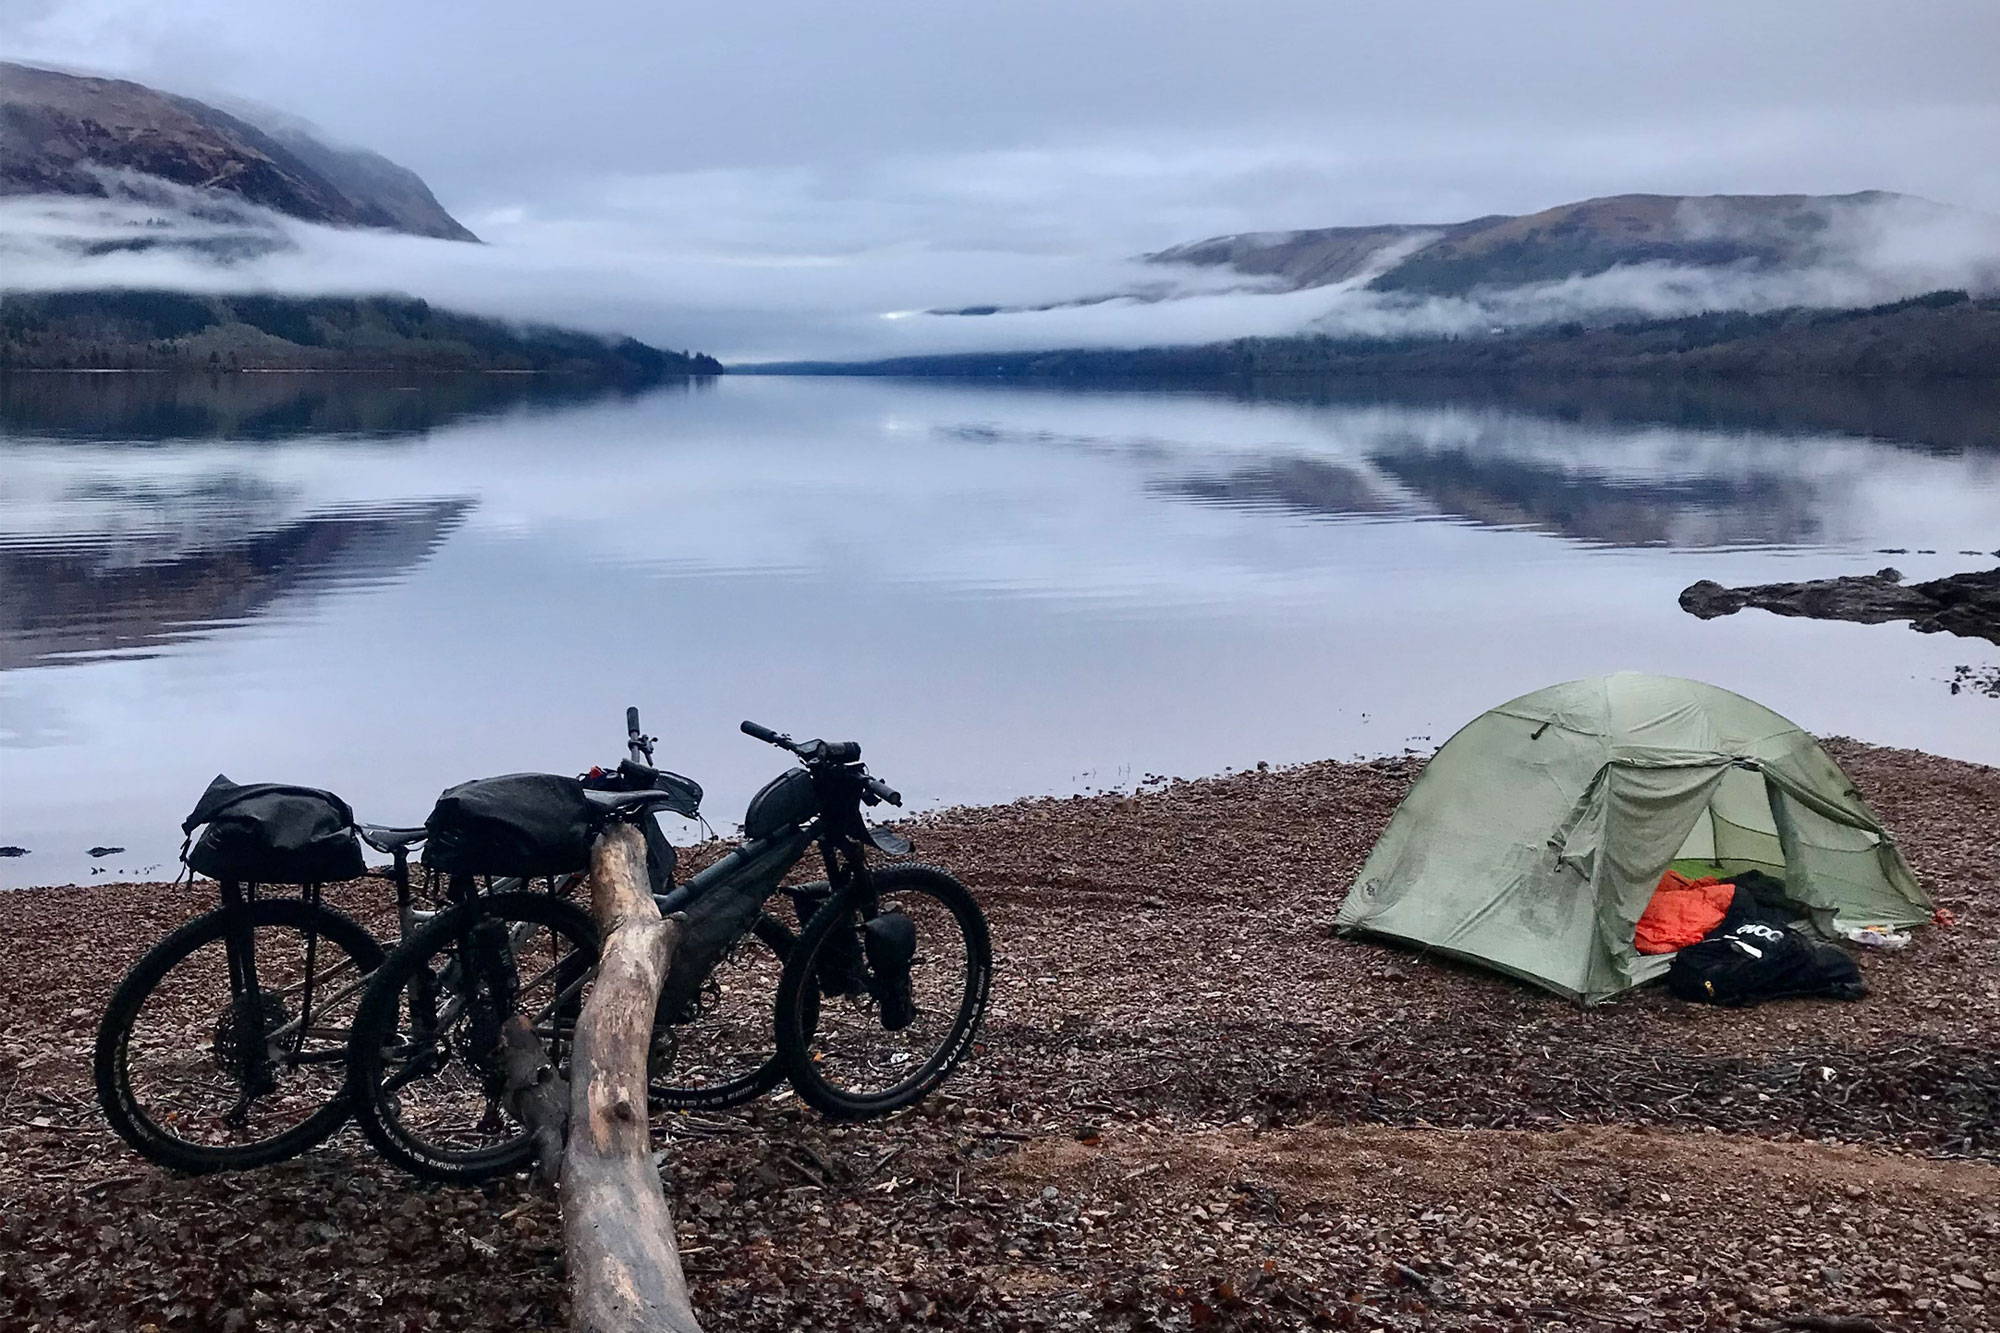 The bikes and tent setup at Loch Lochy